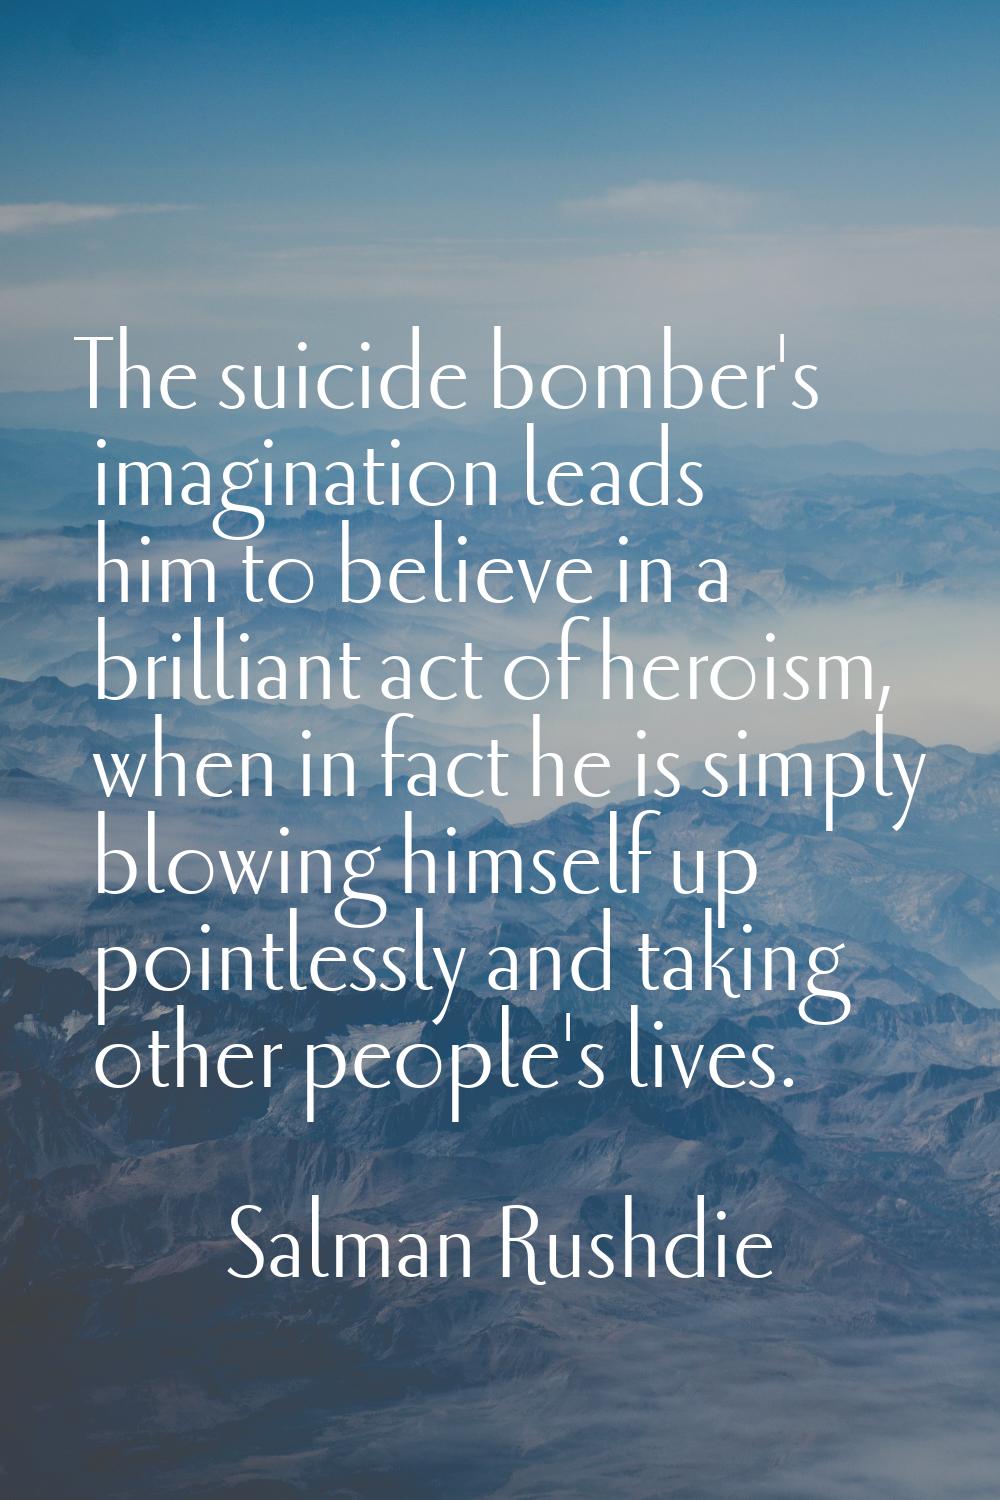 The suicide bomber's imagination leads him to believe in a brilliant act of heroism, when in fact h